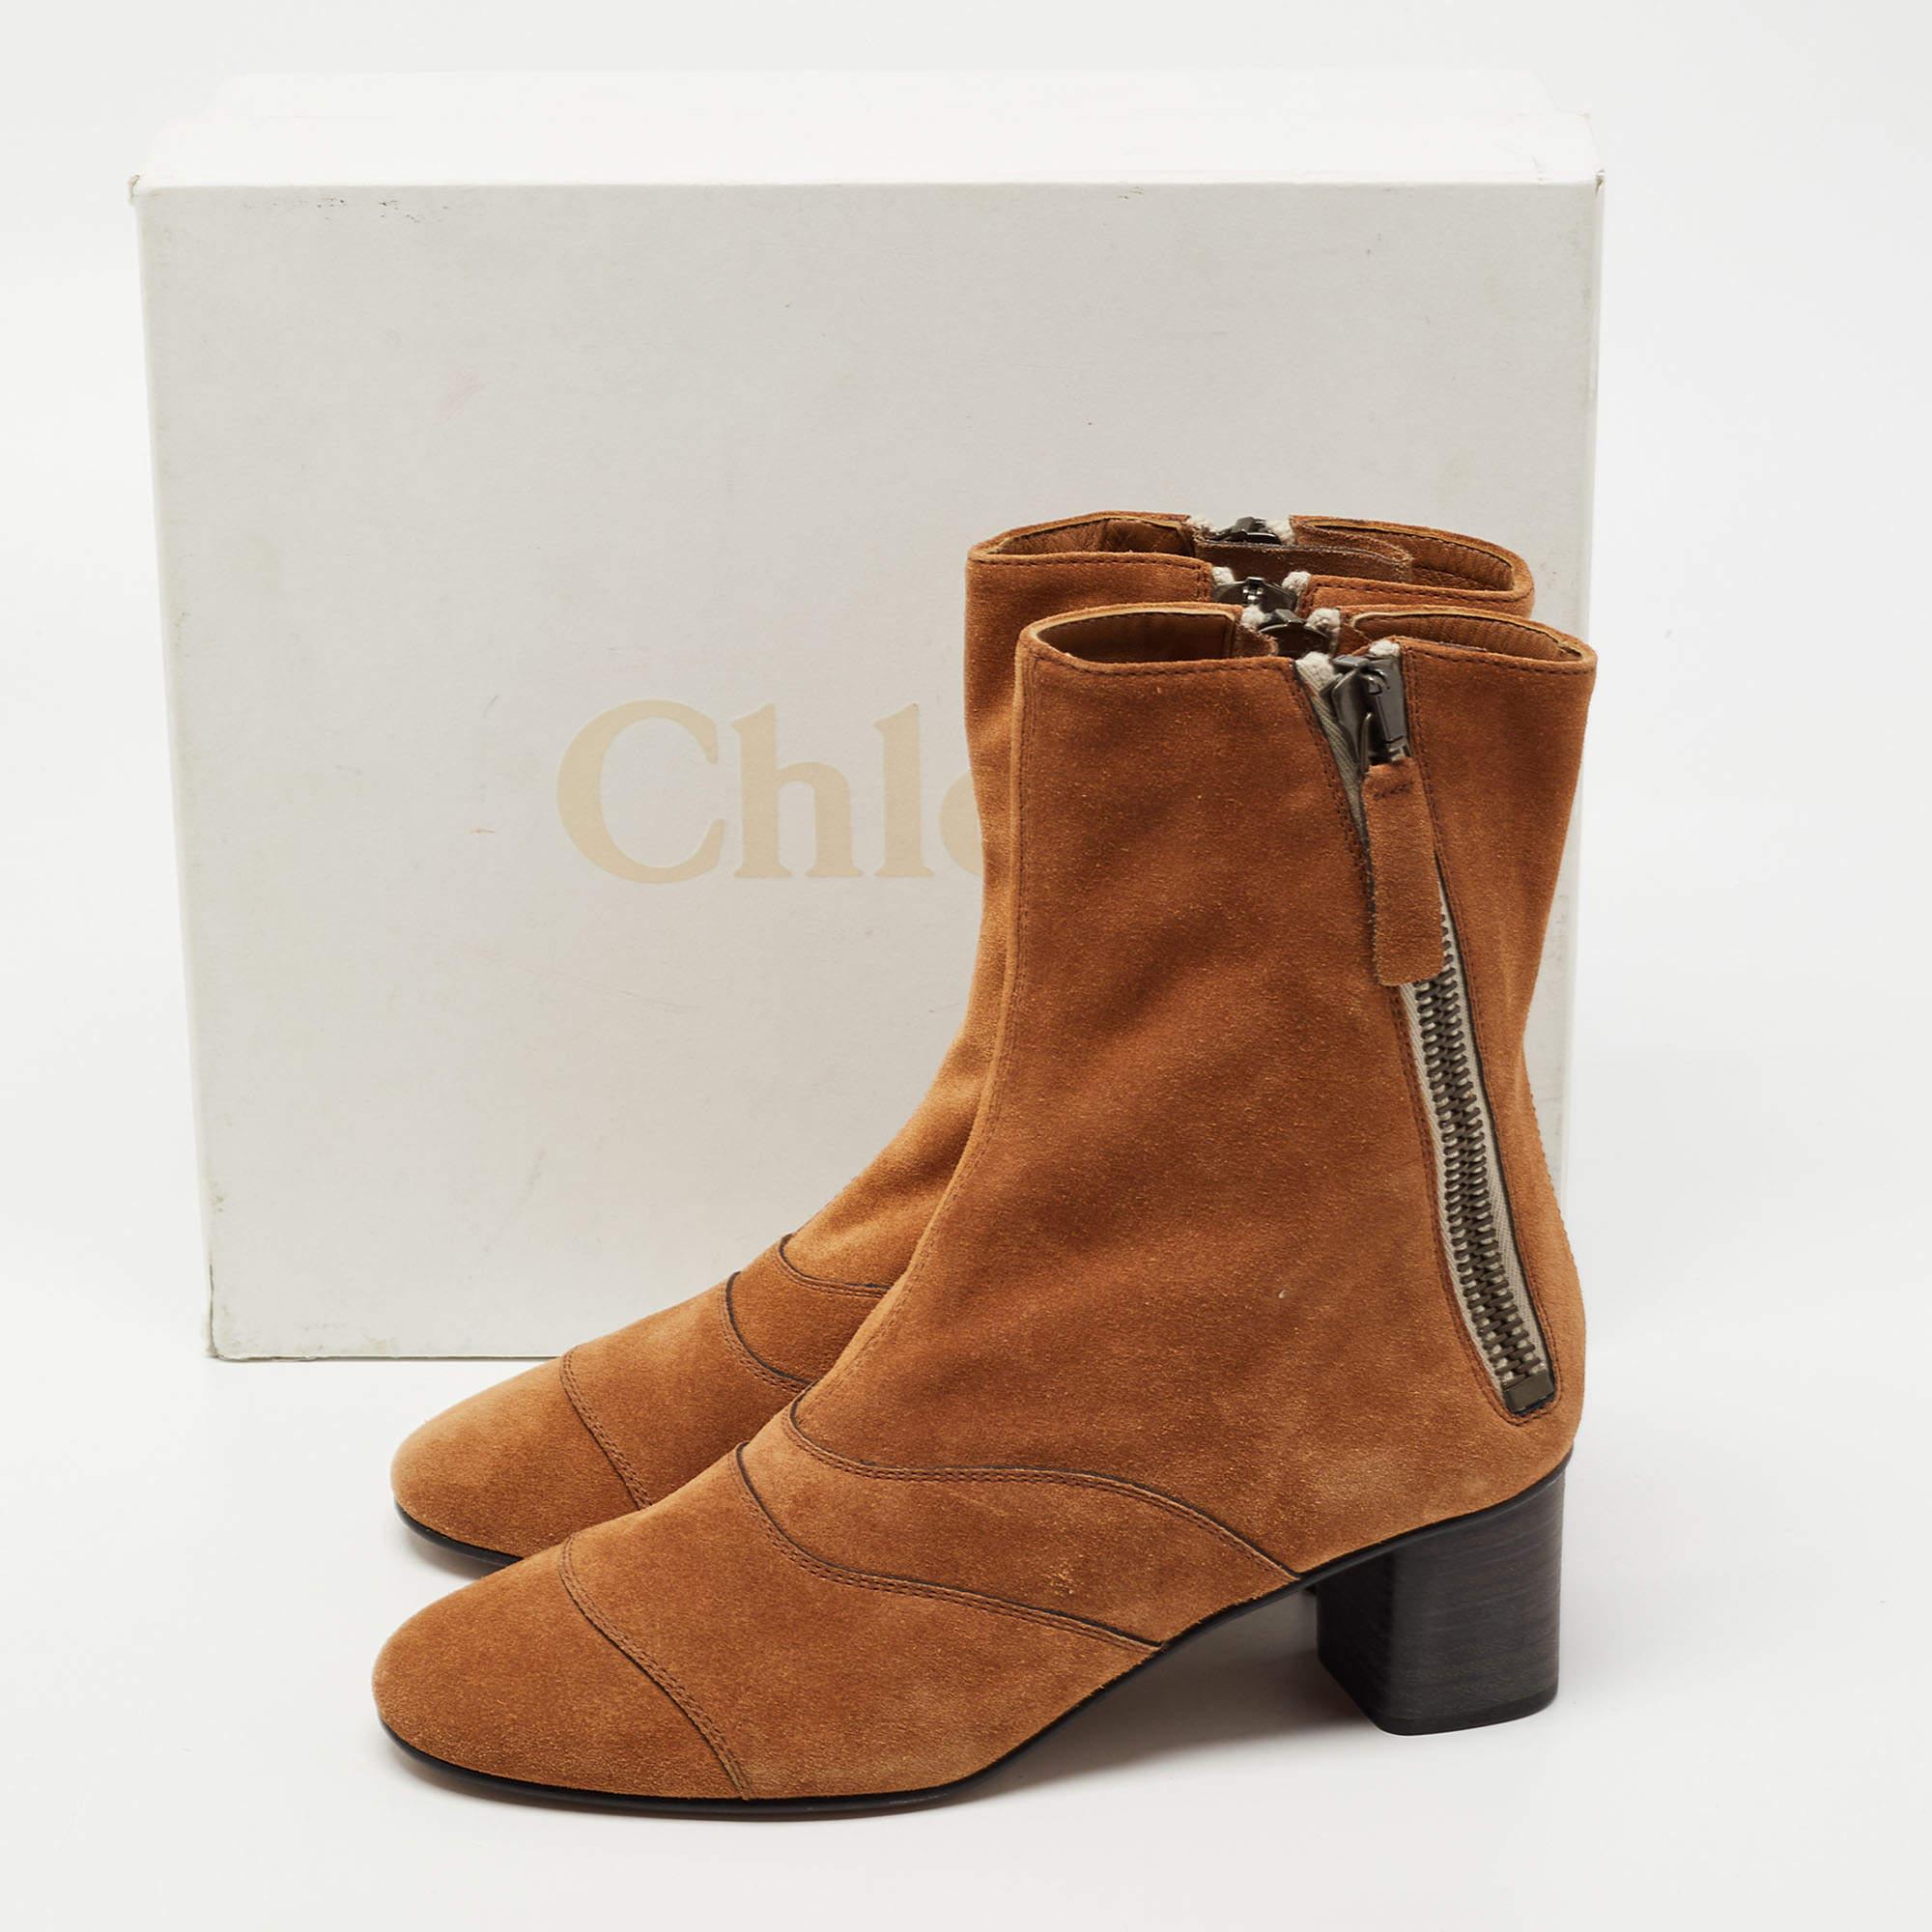 Chloe Brown Suede Zip Ankle Boots Size 37.5 4